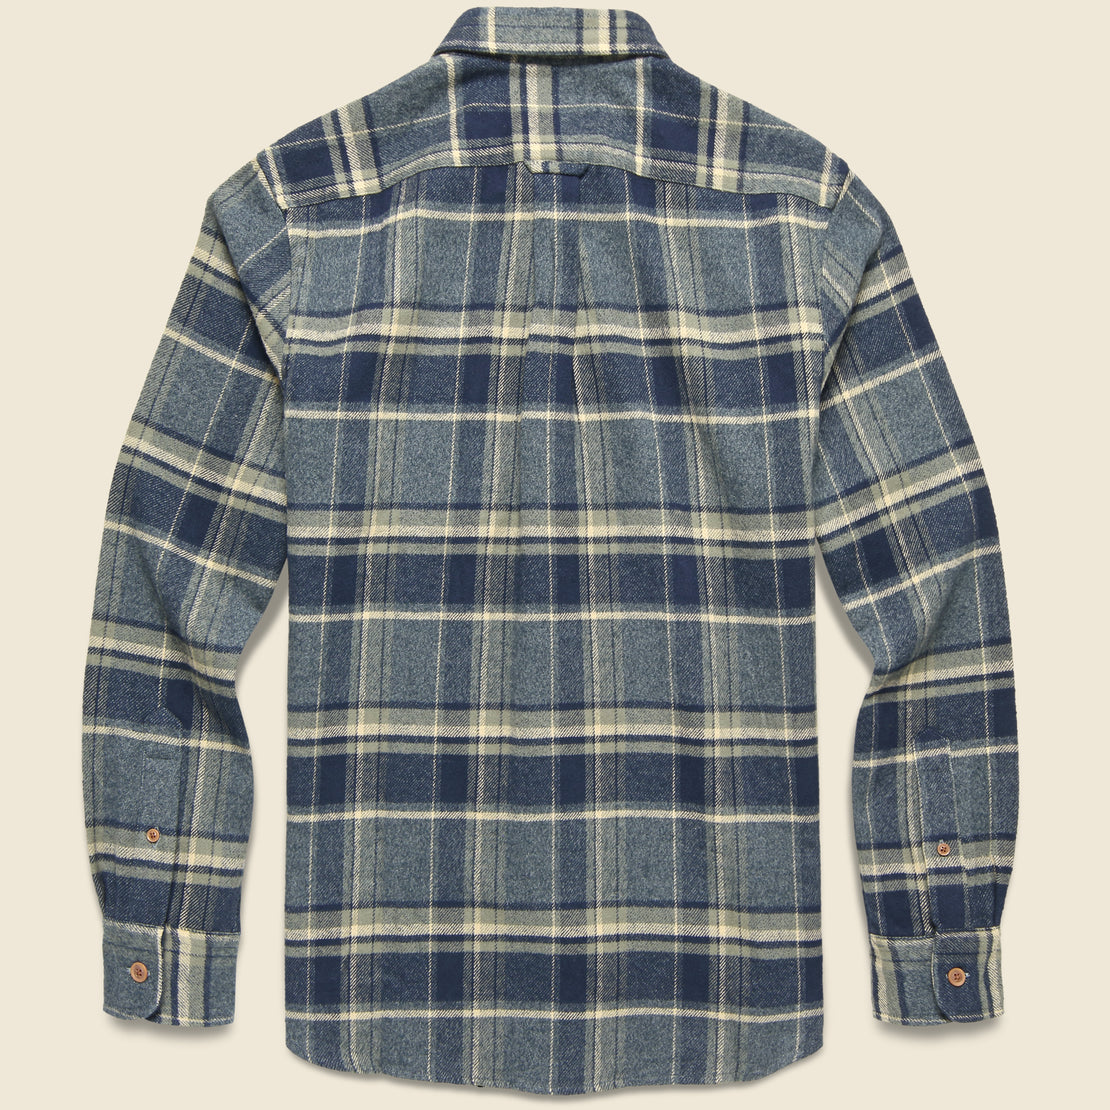 Marvel Jaspe Flannel - Olive Green - Grayers - STAG Provisions - Tops - L/S Woven - Plaid